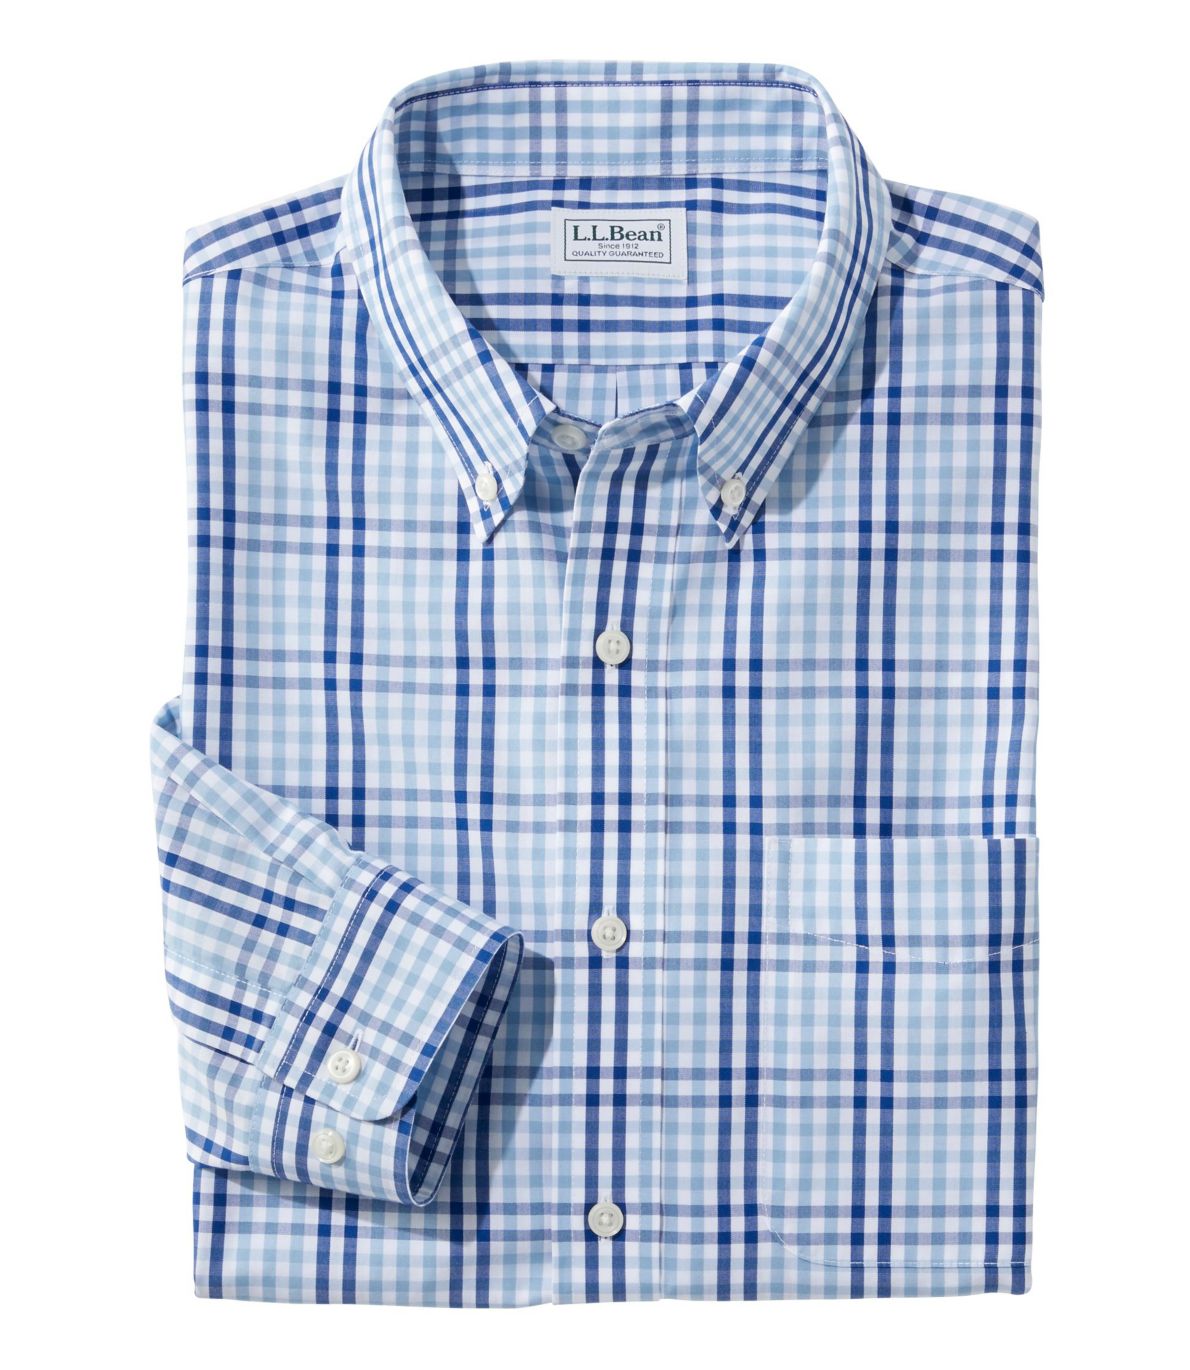 Men's Wrinkle-Free Vacationland Sport Shirt, Slightly Fitted Gingham